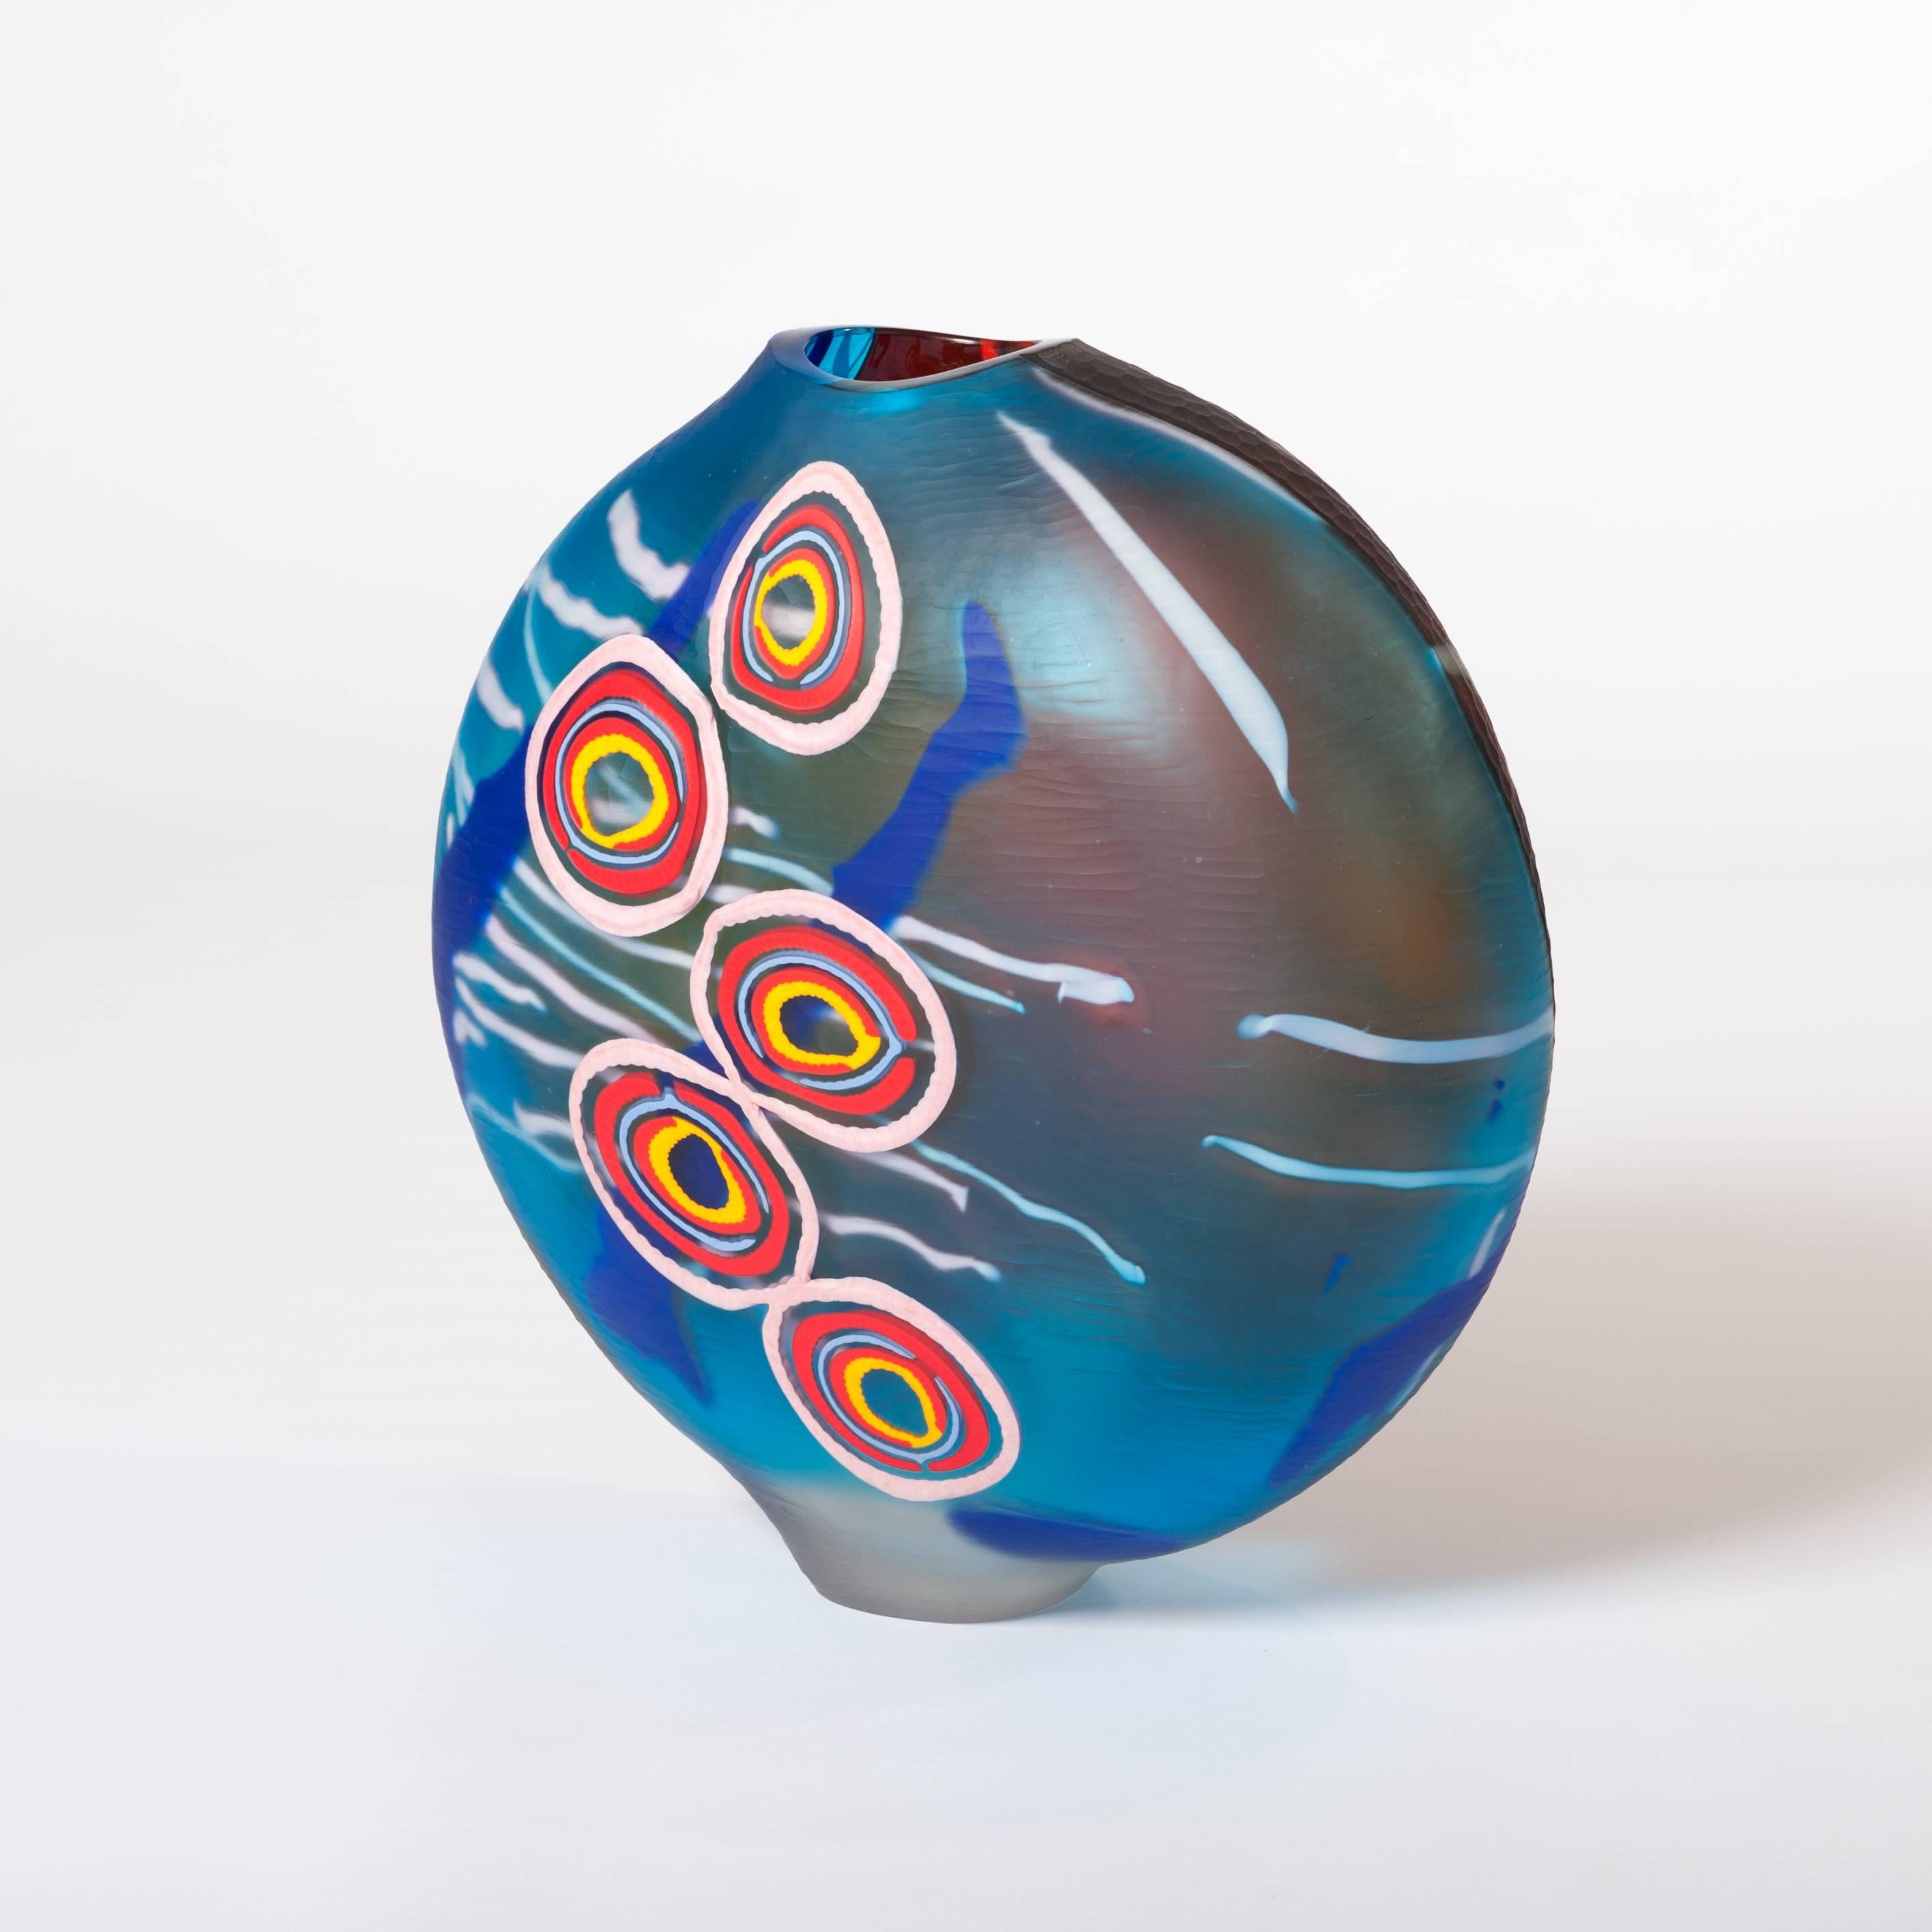 Fantastic mouthblown blue-brown-red Murano glass vase by Marco and Mattia Salvadore in different glass technics. 
(signed Studio Salvadore, Murano)

Marco and Mattia Salvadore (born 1983 and 1979) are two Italian glass blowers who live and work in